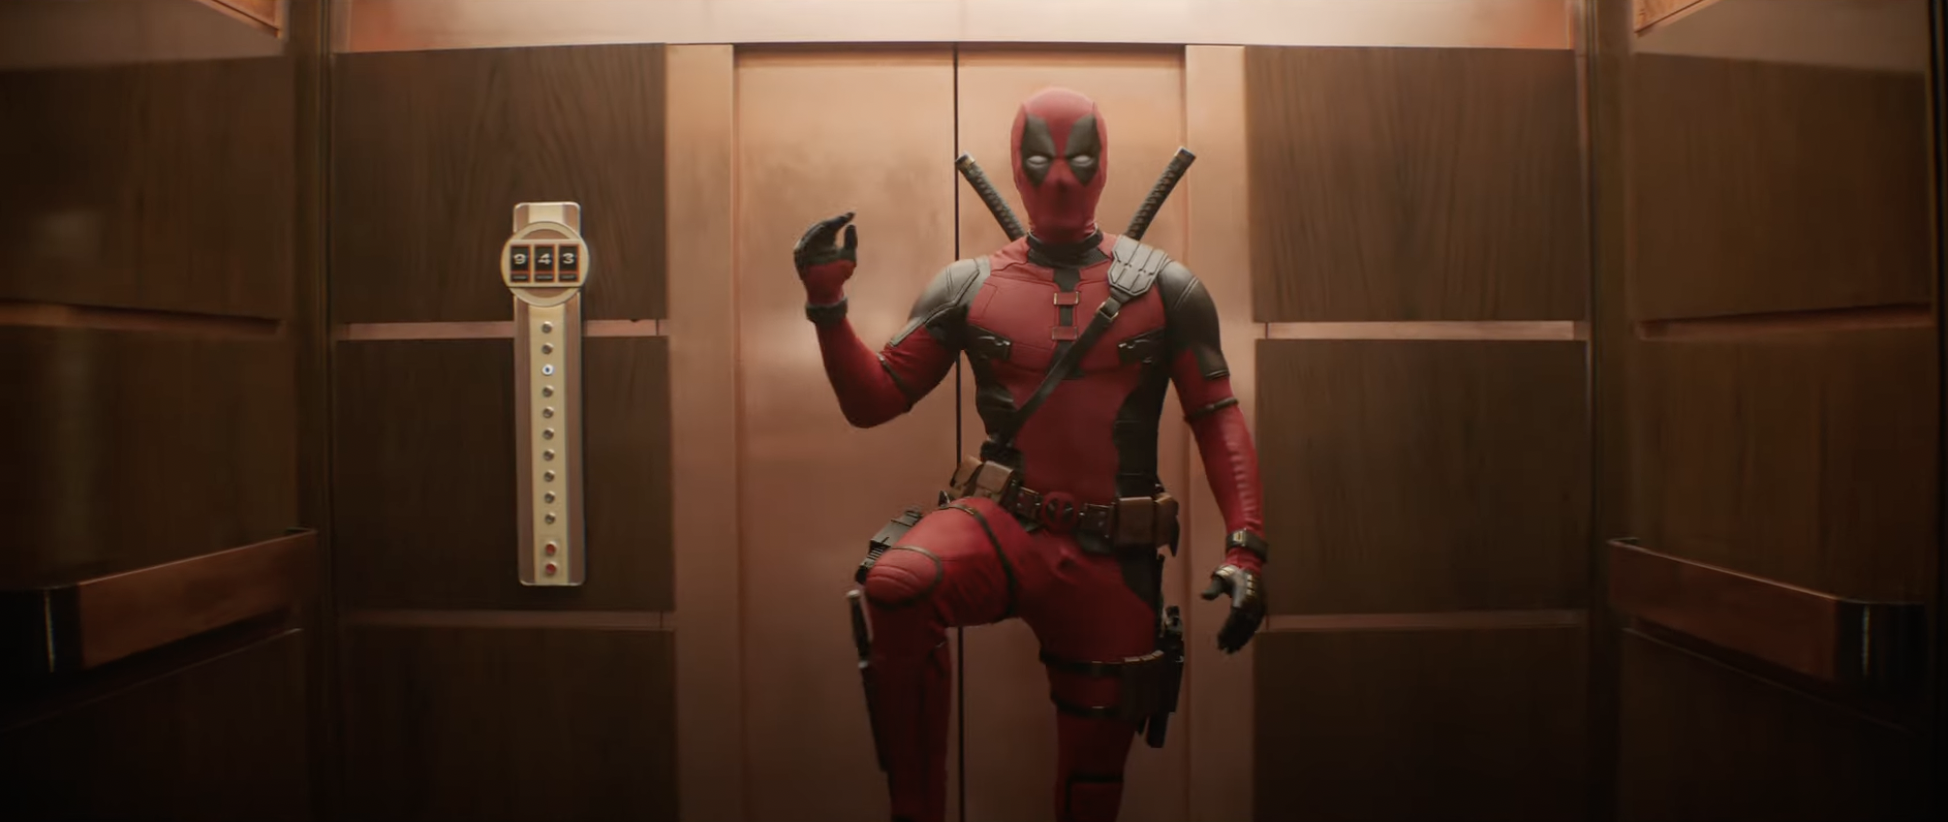 Deadpool joins forces with the TVA?